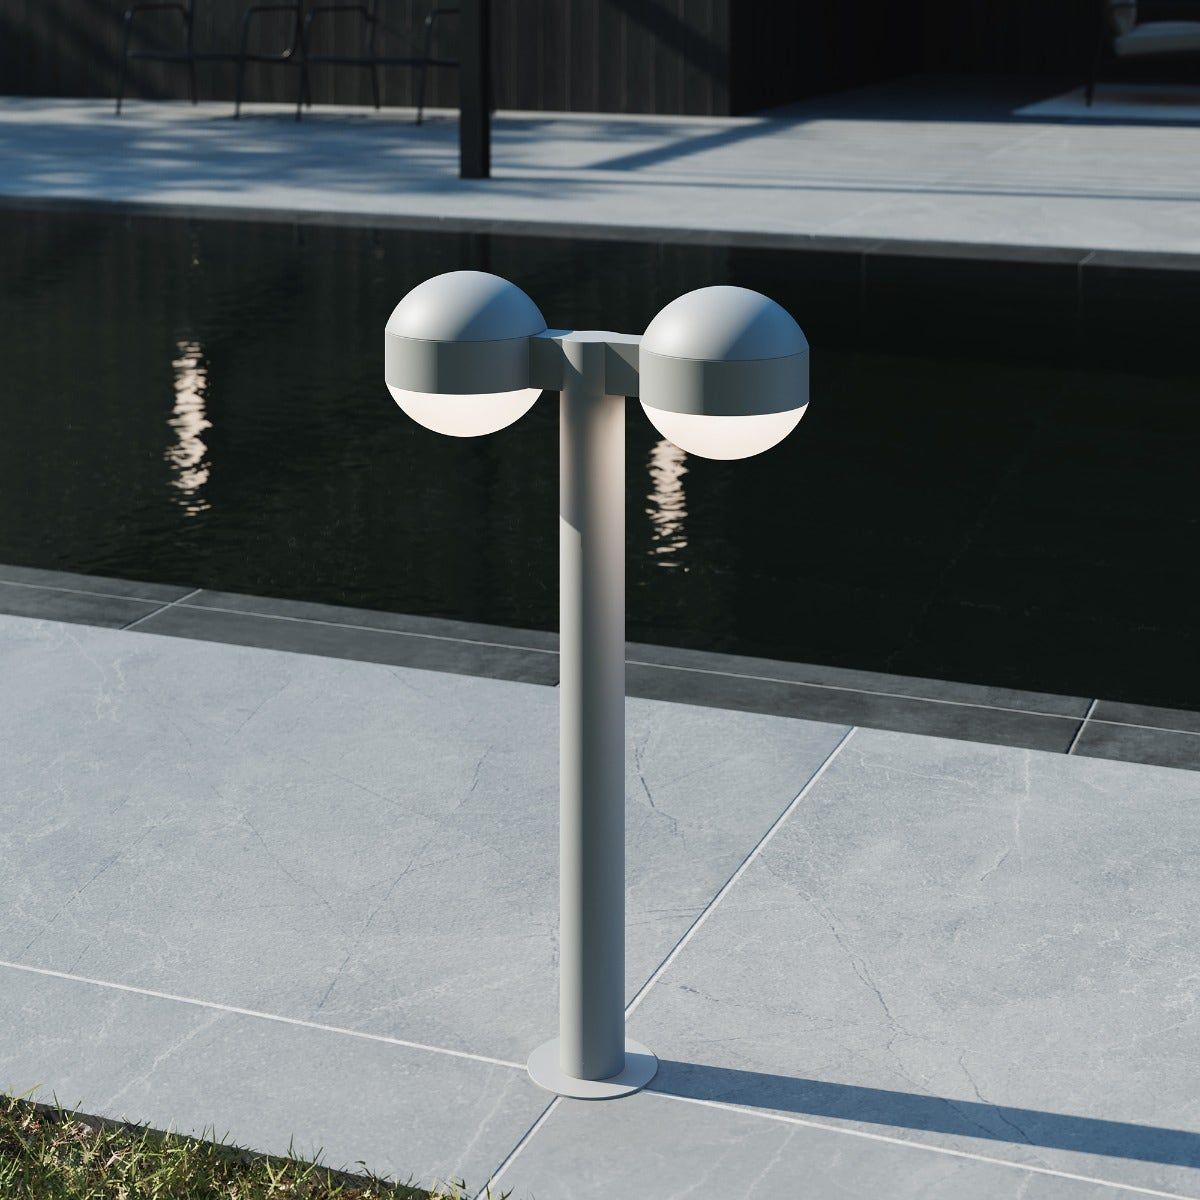 REALS 28" LED Double Bollard with Dome Cap and Dome Lens